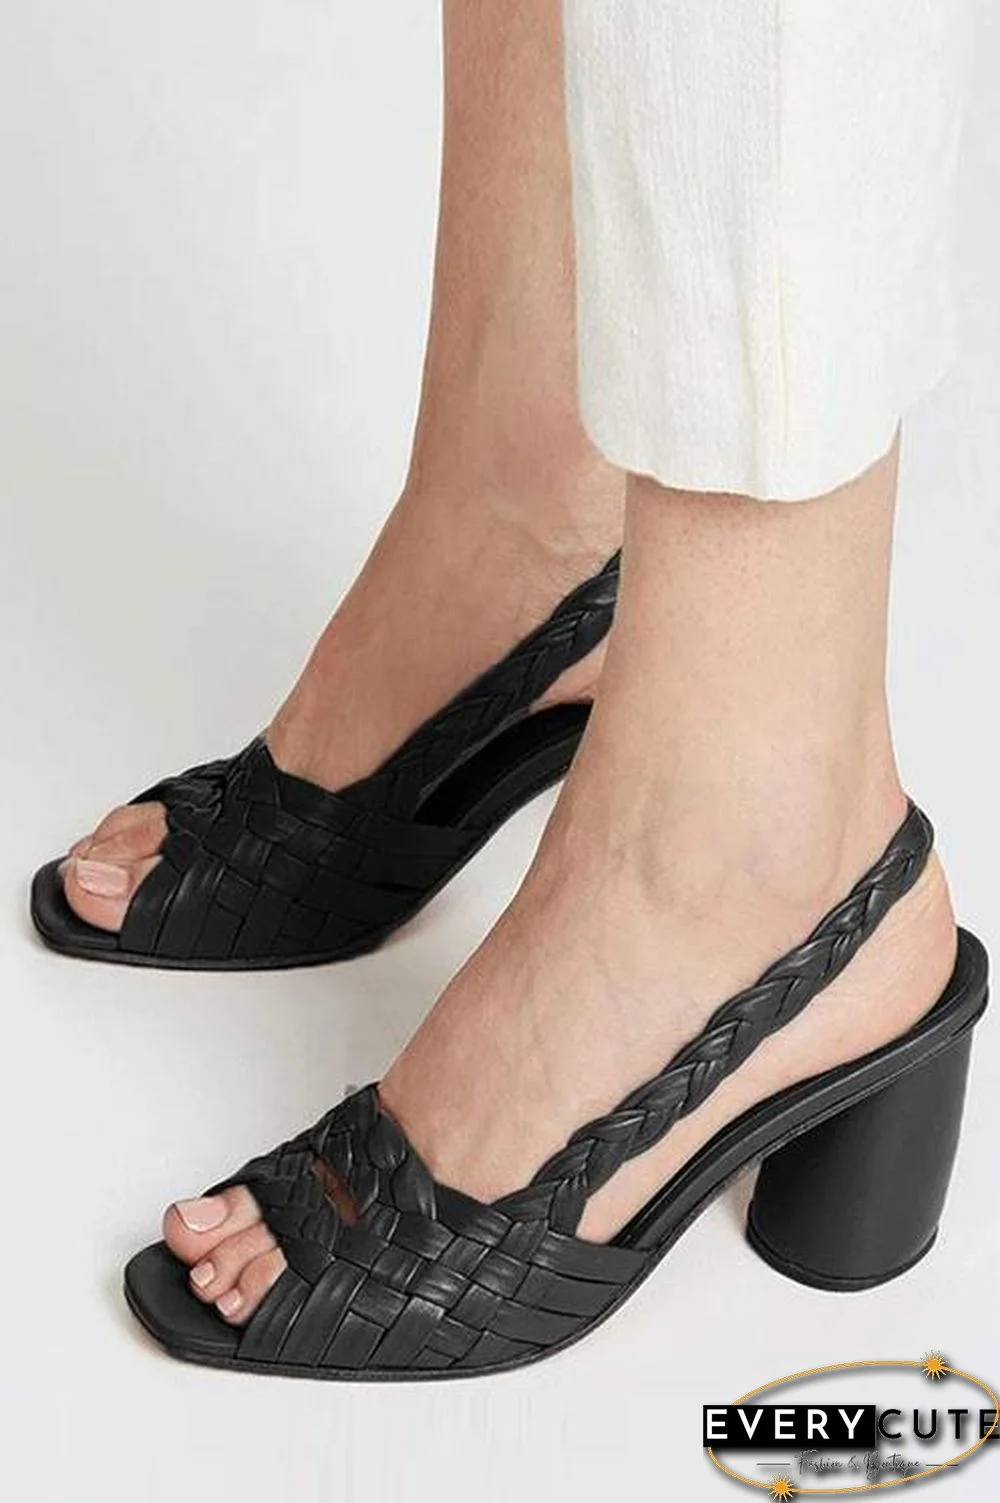 Interweave Peep Toe Ankle Strap High Chunky Sandals